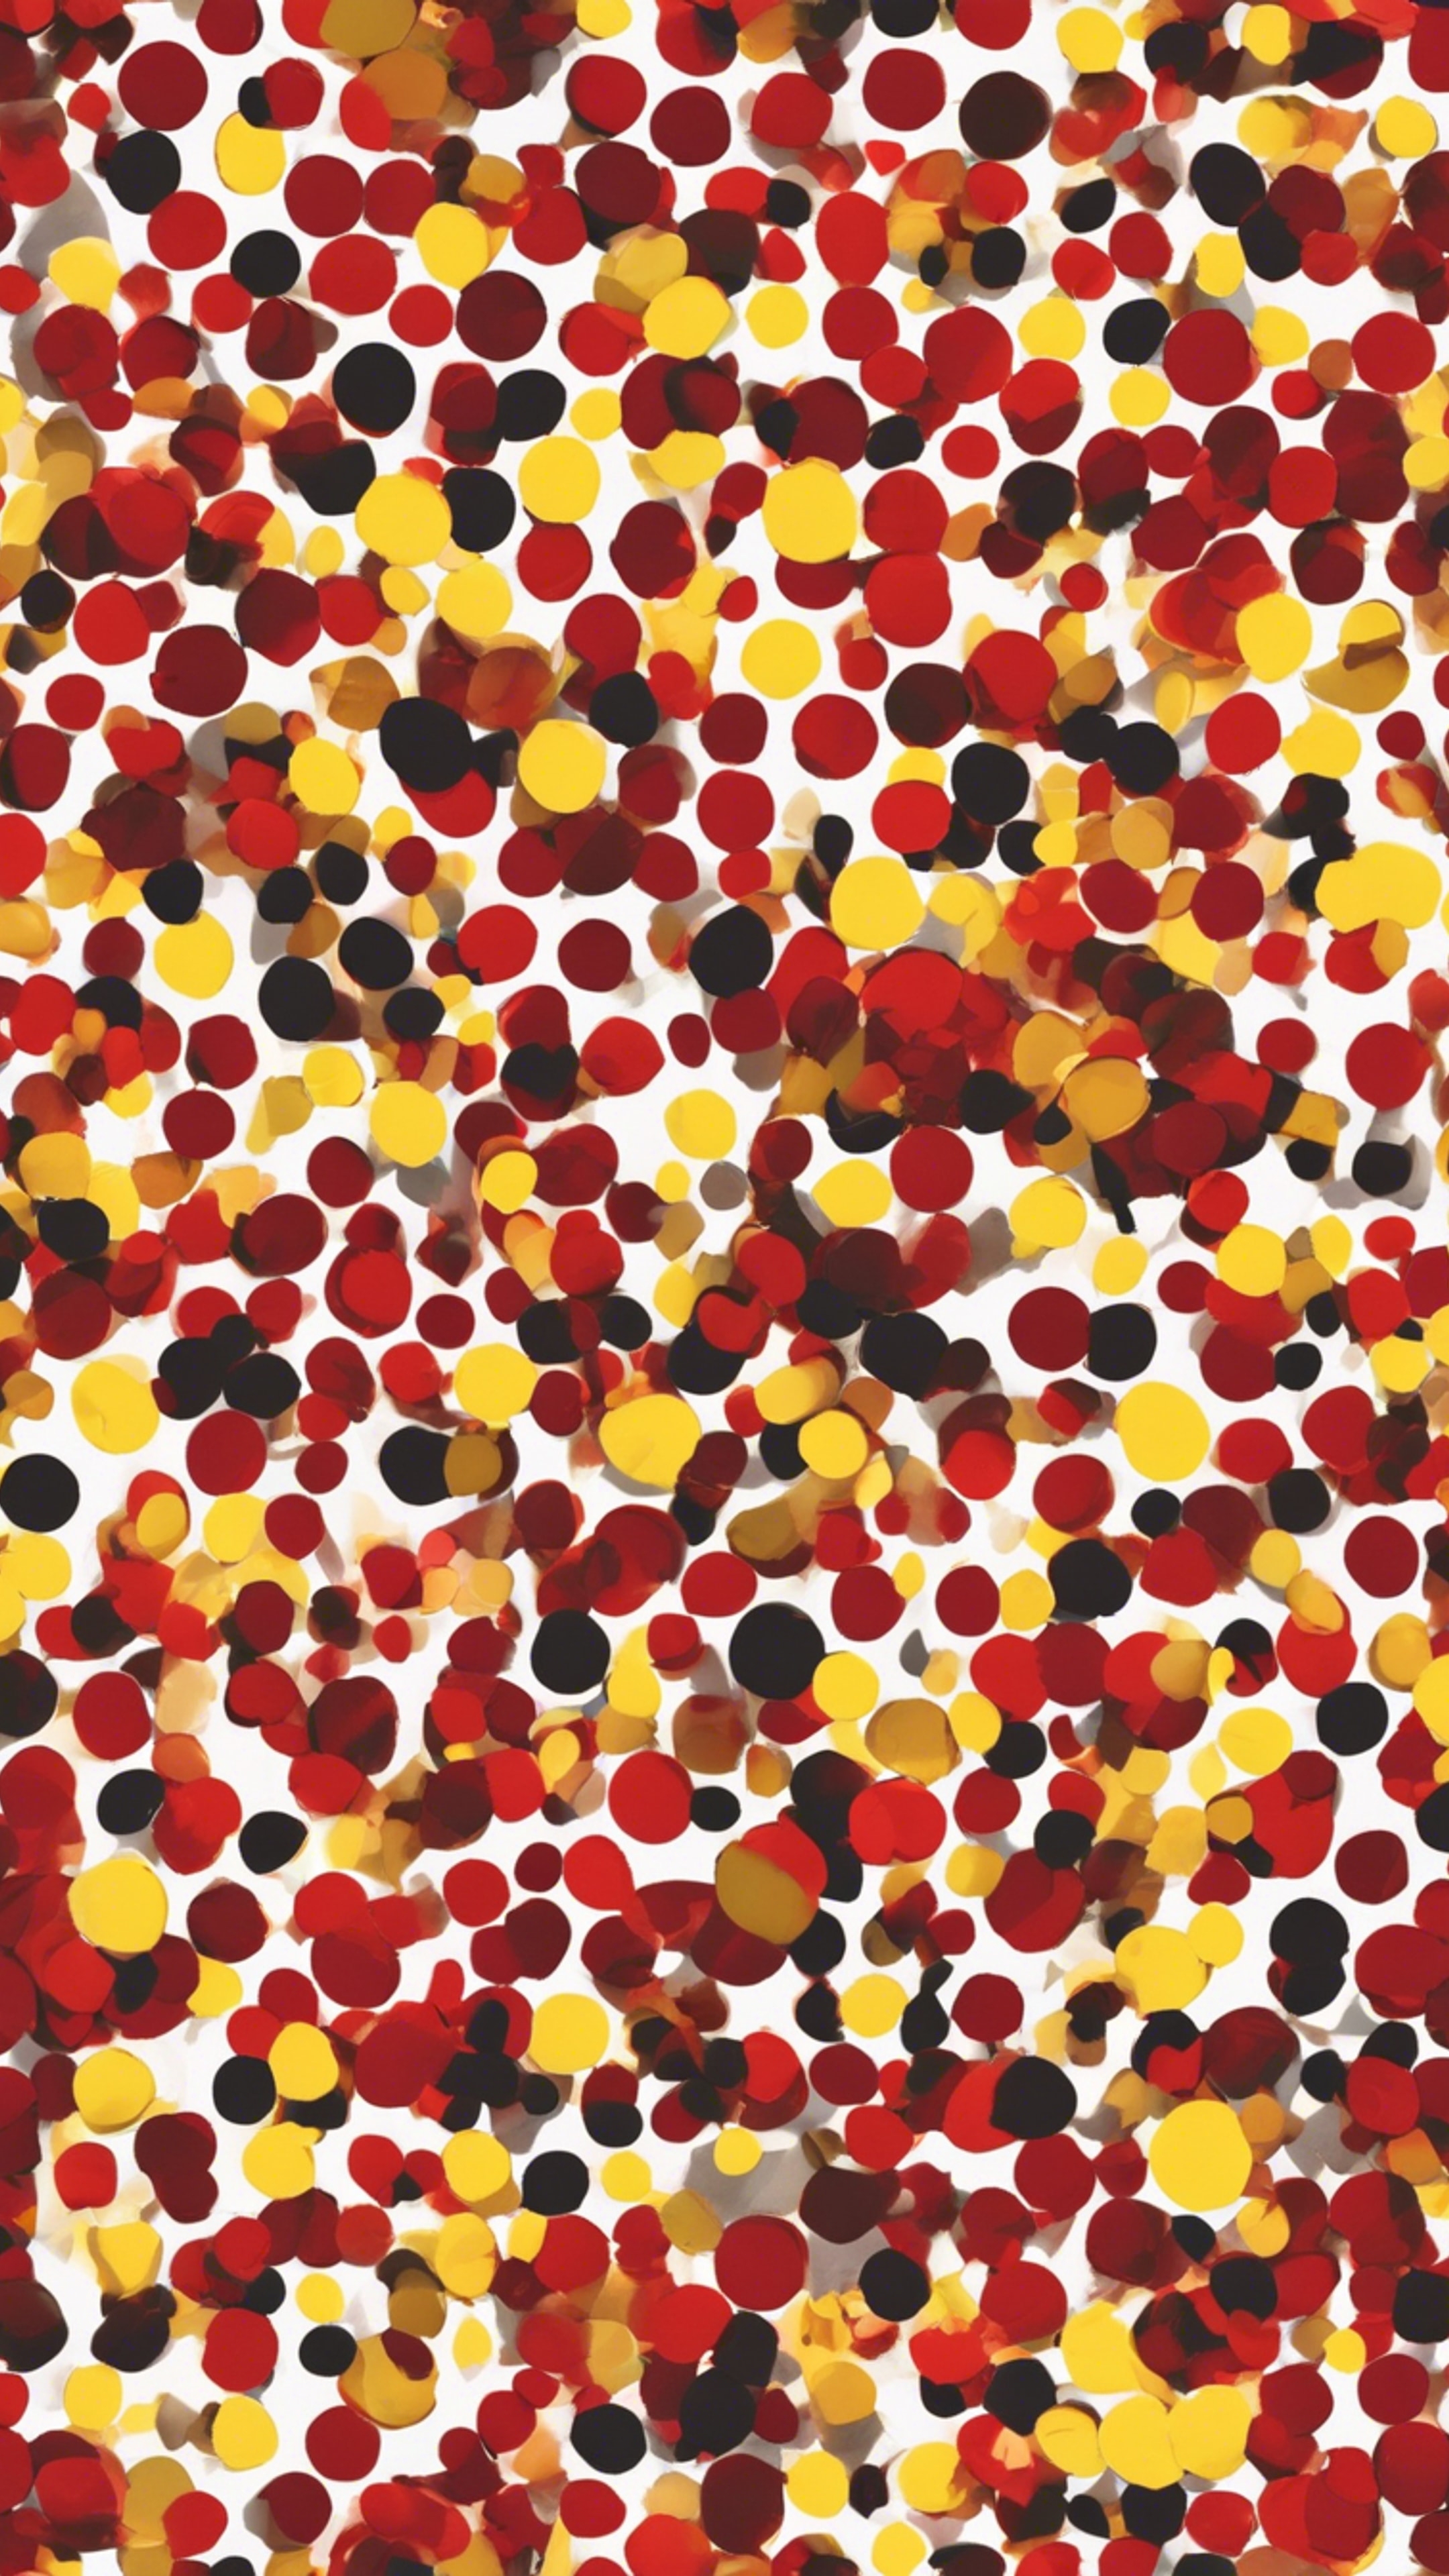 Scattered polka dots, small red ones and large yellow ones, in a seamless pattern. Валлпапер[491989b84cbb438494fe]